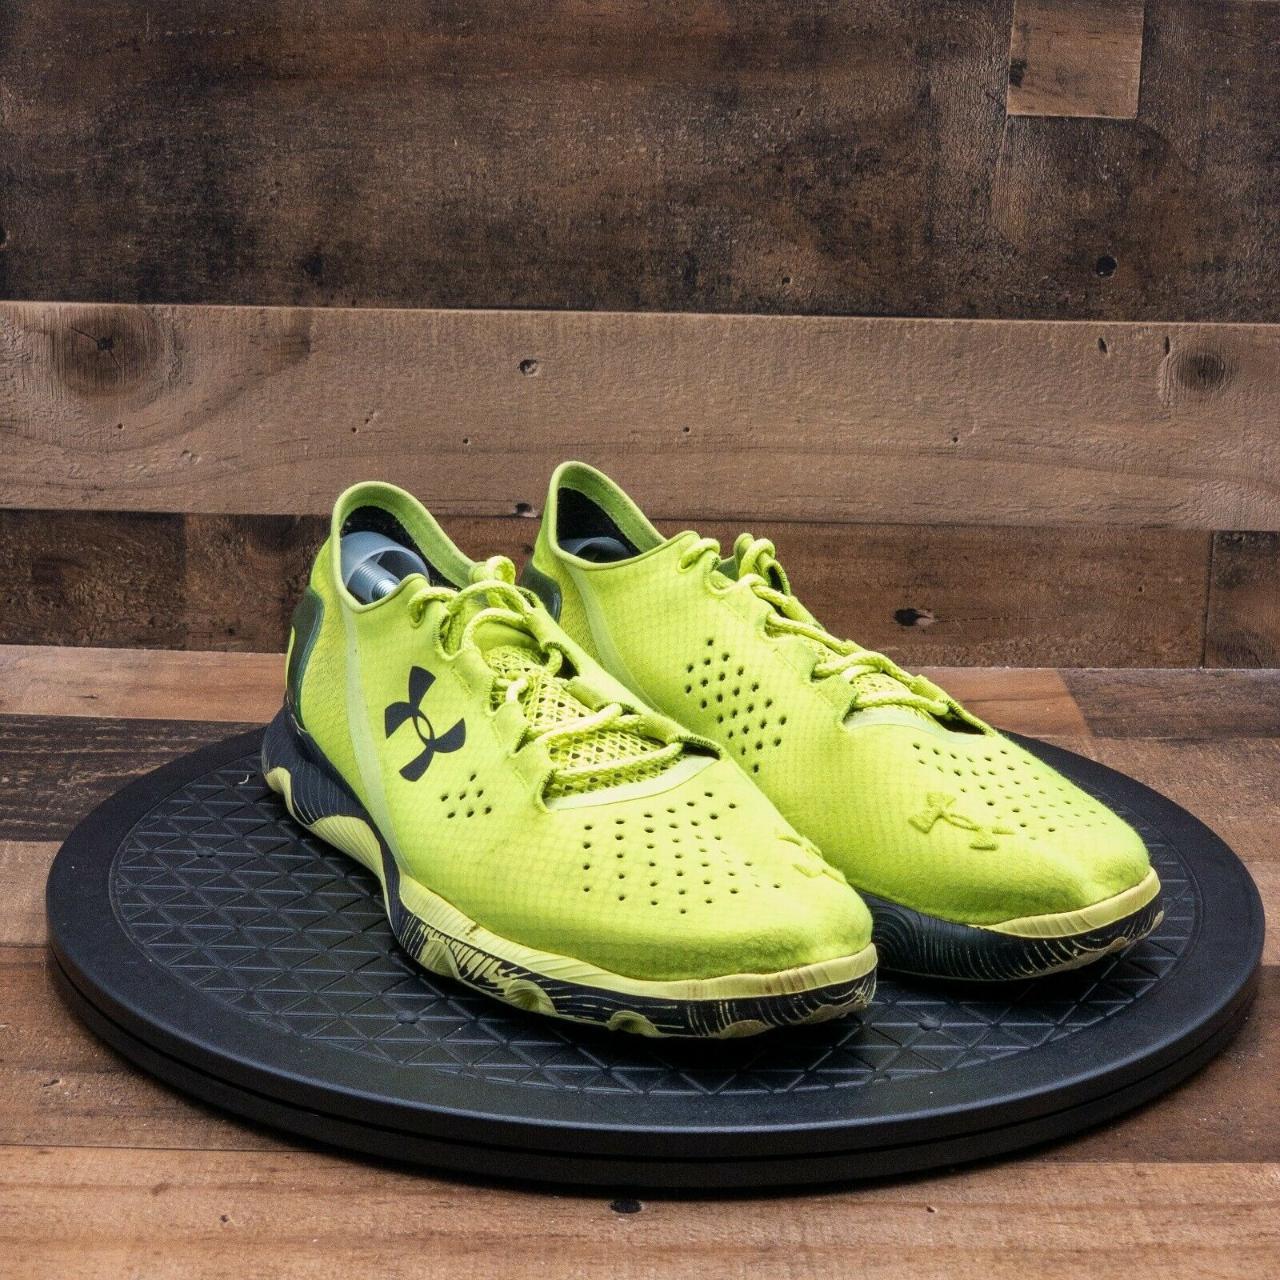 Under Armour Men's Green and Yellow Trainers